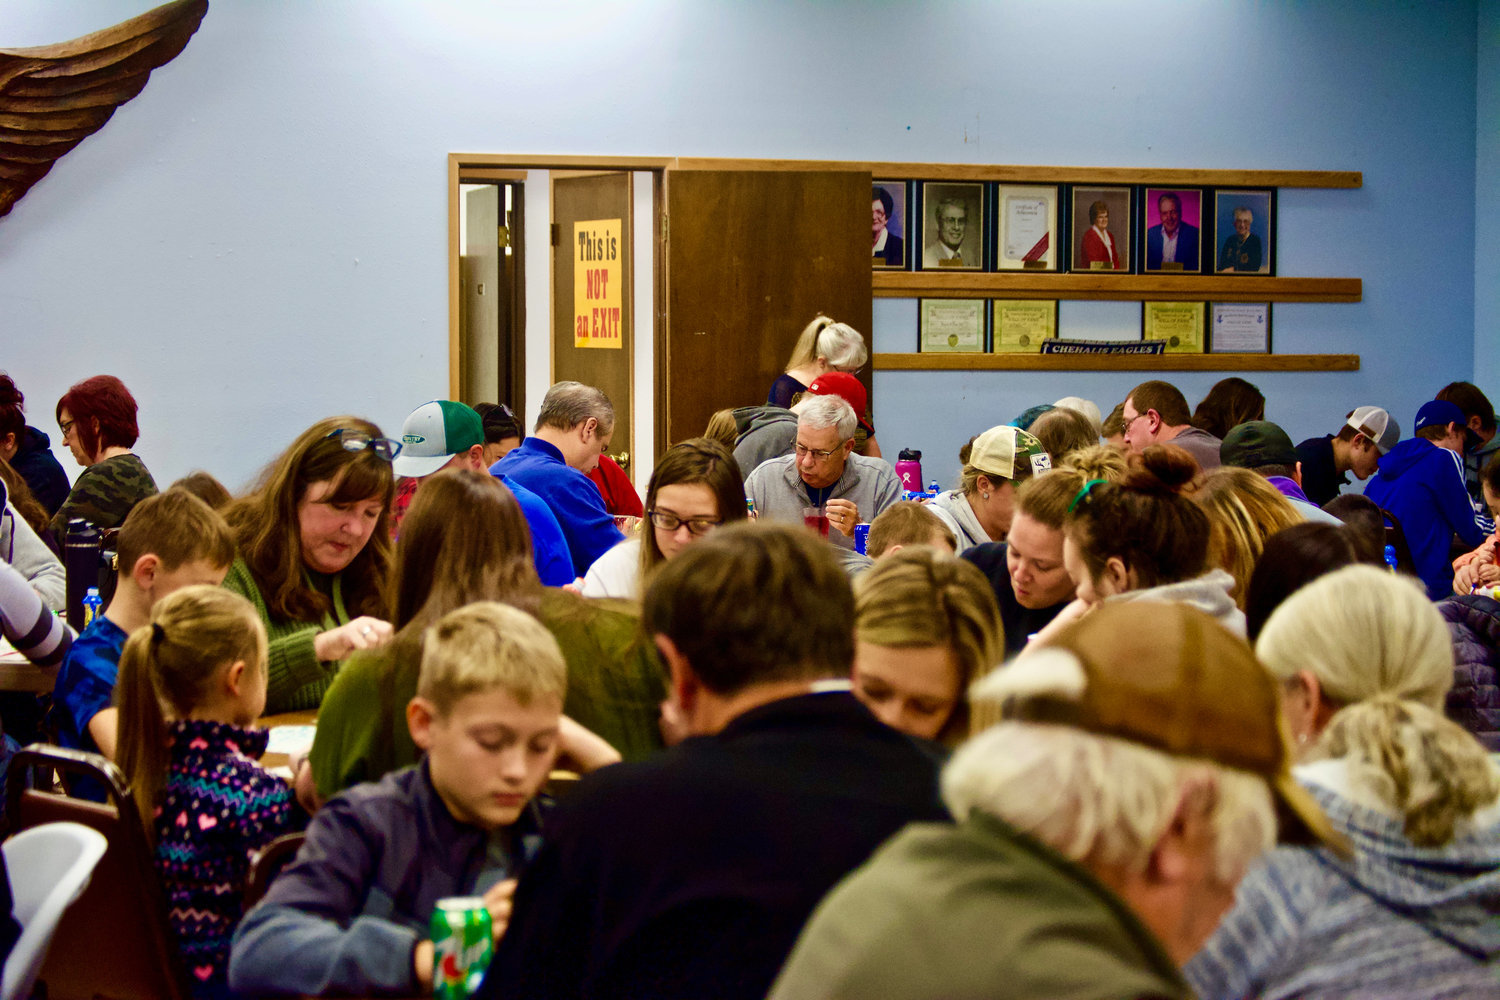 The Chehalis Eagles event space was packed to standing-room only for the Twin Cities Rotary Club’s annual turkey bingo event in 2021.